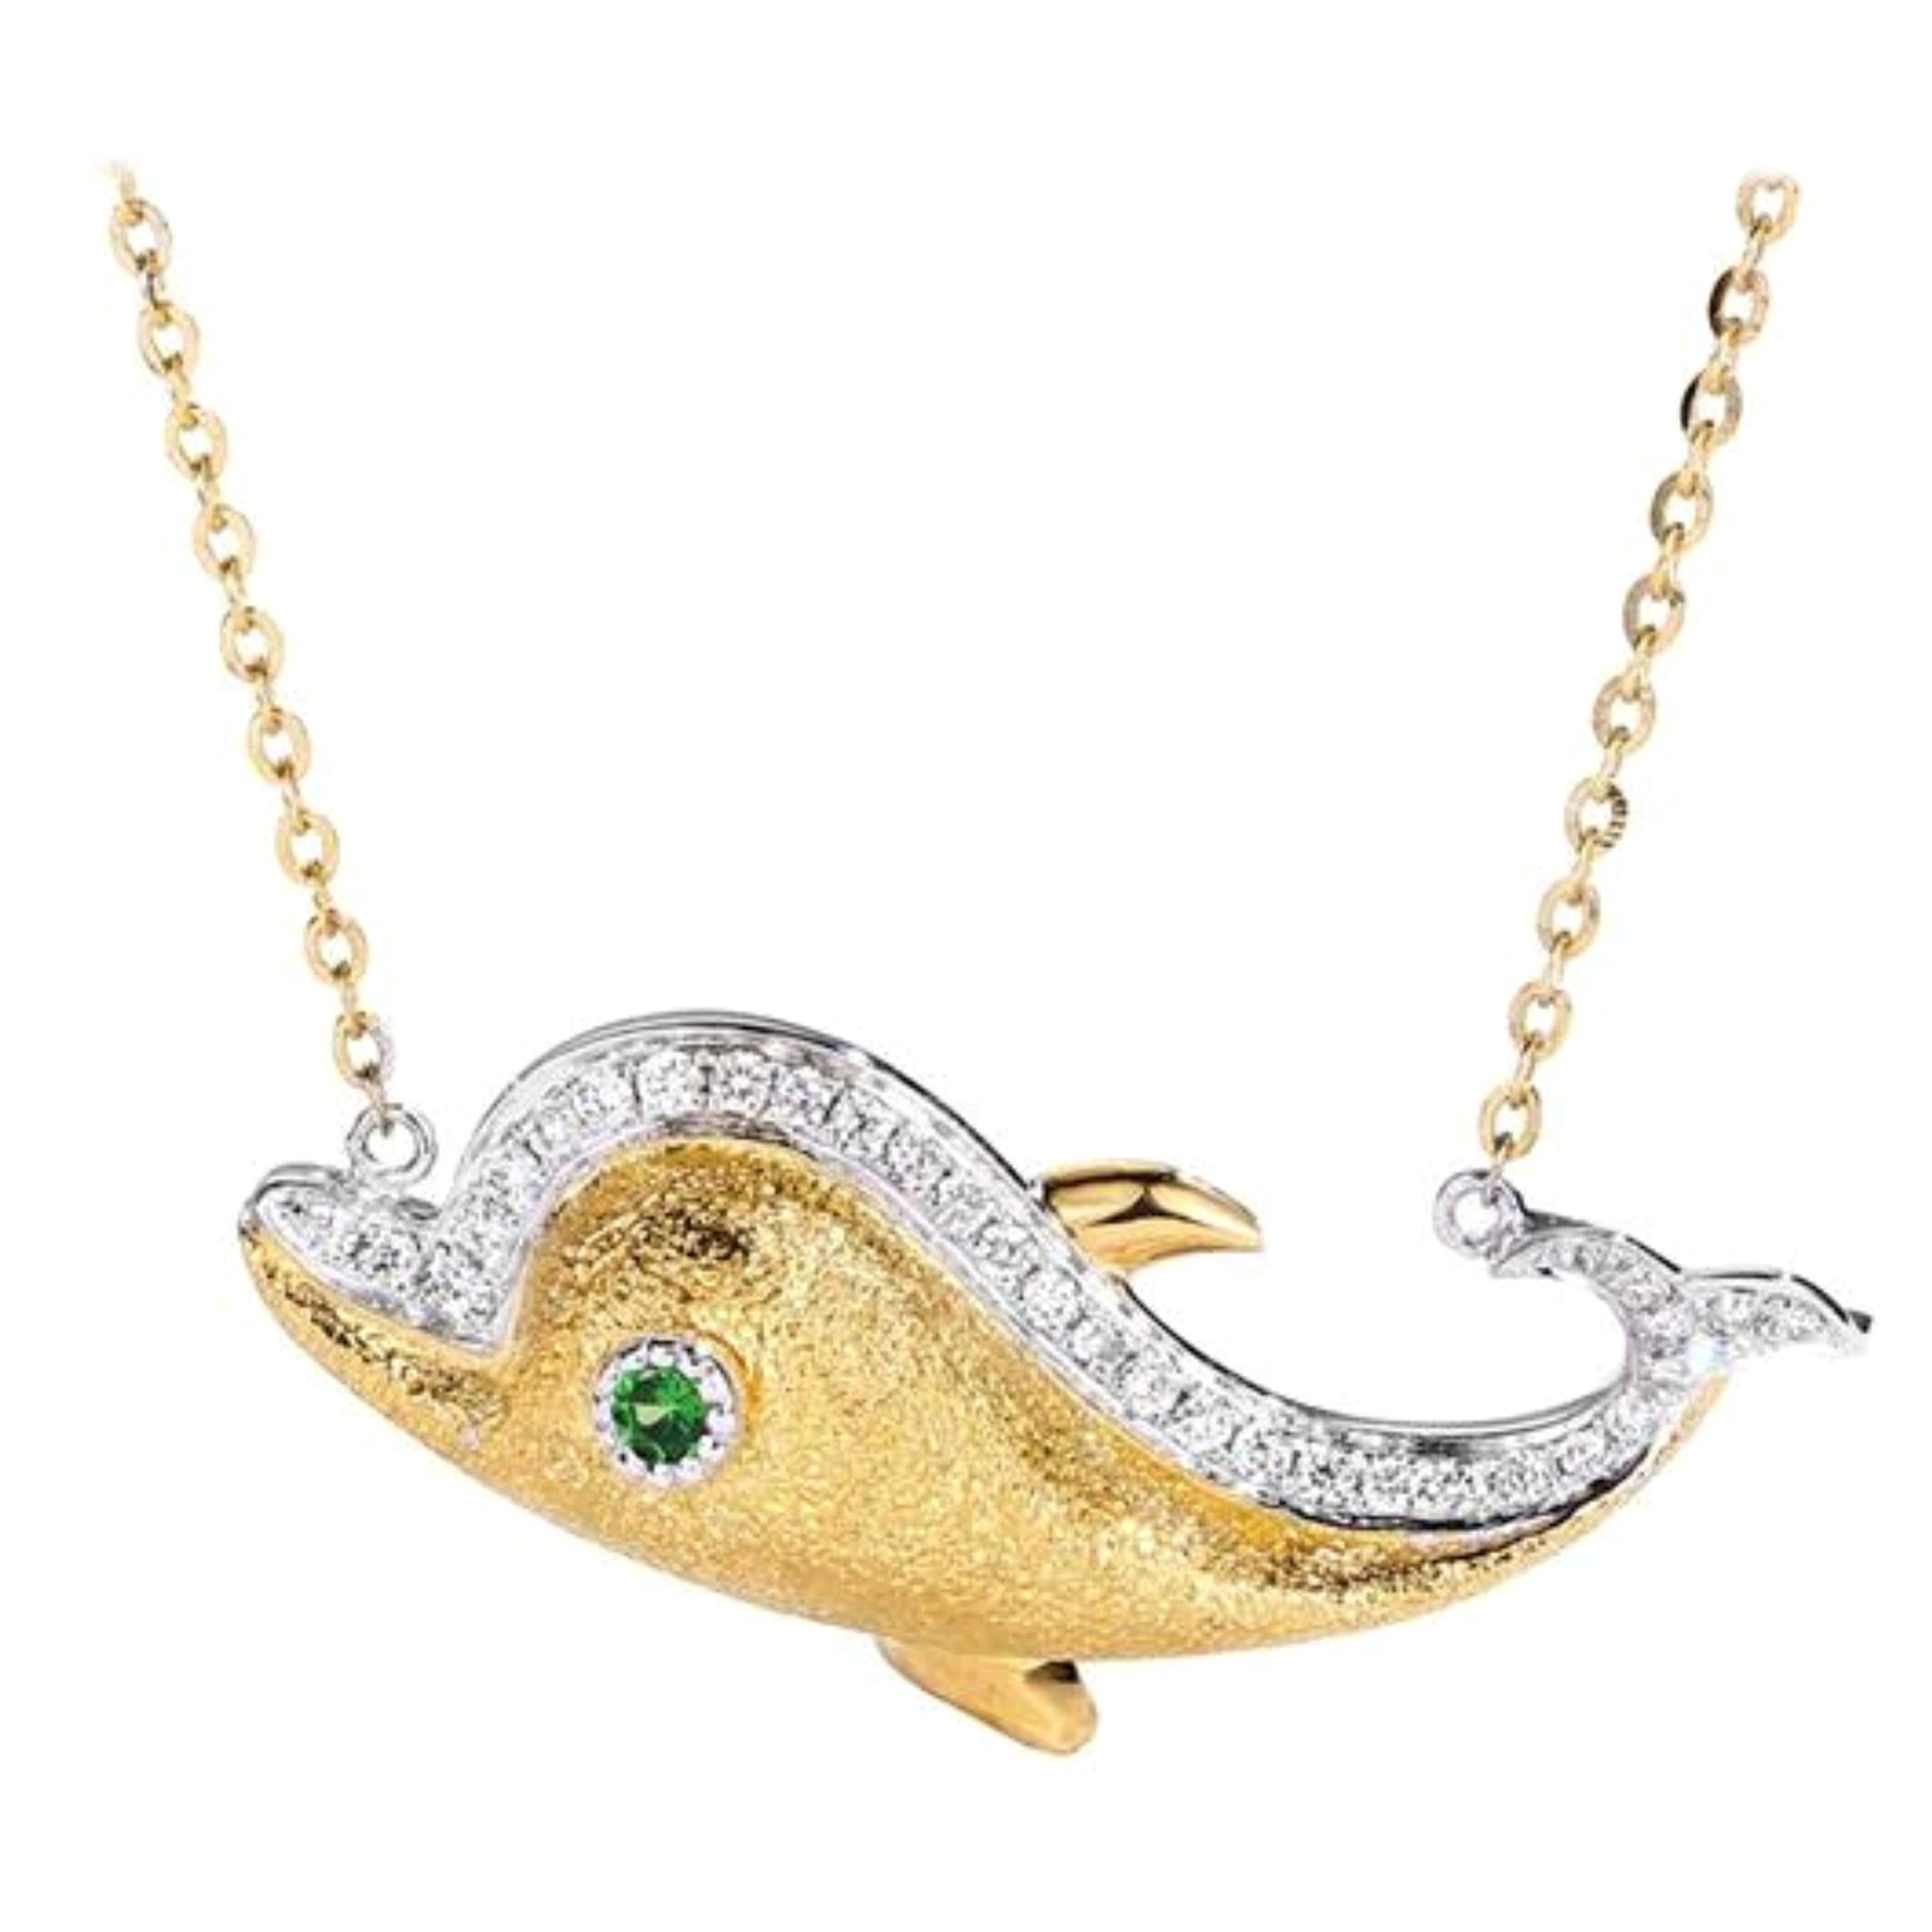 Dolphin Tsavorite Diamond Necklace 18 Karat Yellow and White Gold For Sale